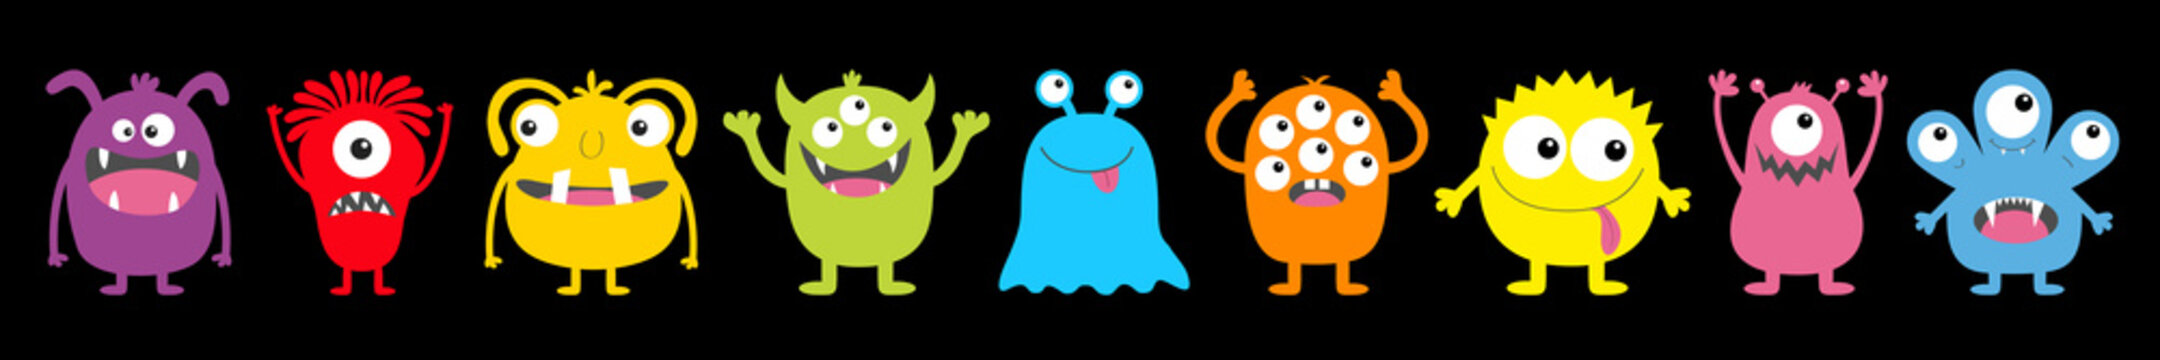 Monster colorful round silhouette icon set line. Happy Halloween. Eyes, tongue, tooth fang, hands up. Cute cartoon kawaii scary funny baby character. Black background. Flat design.